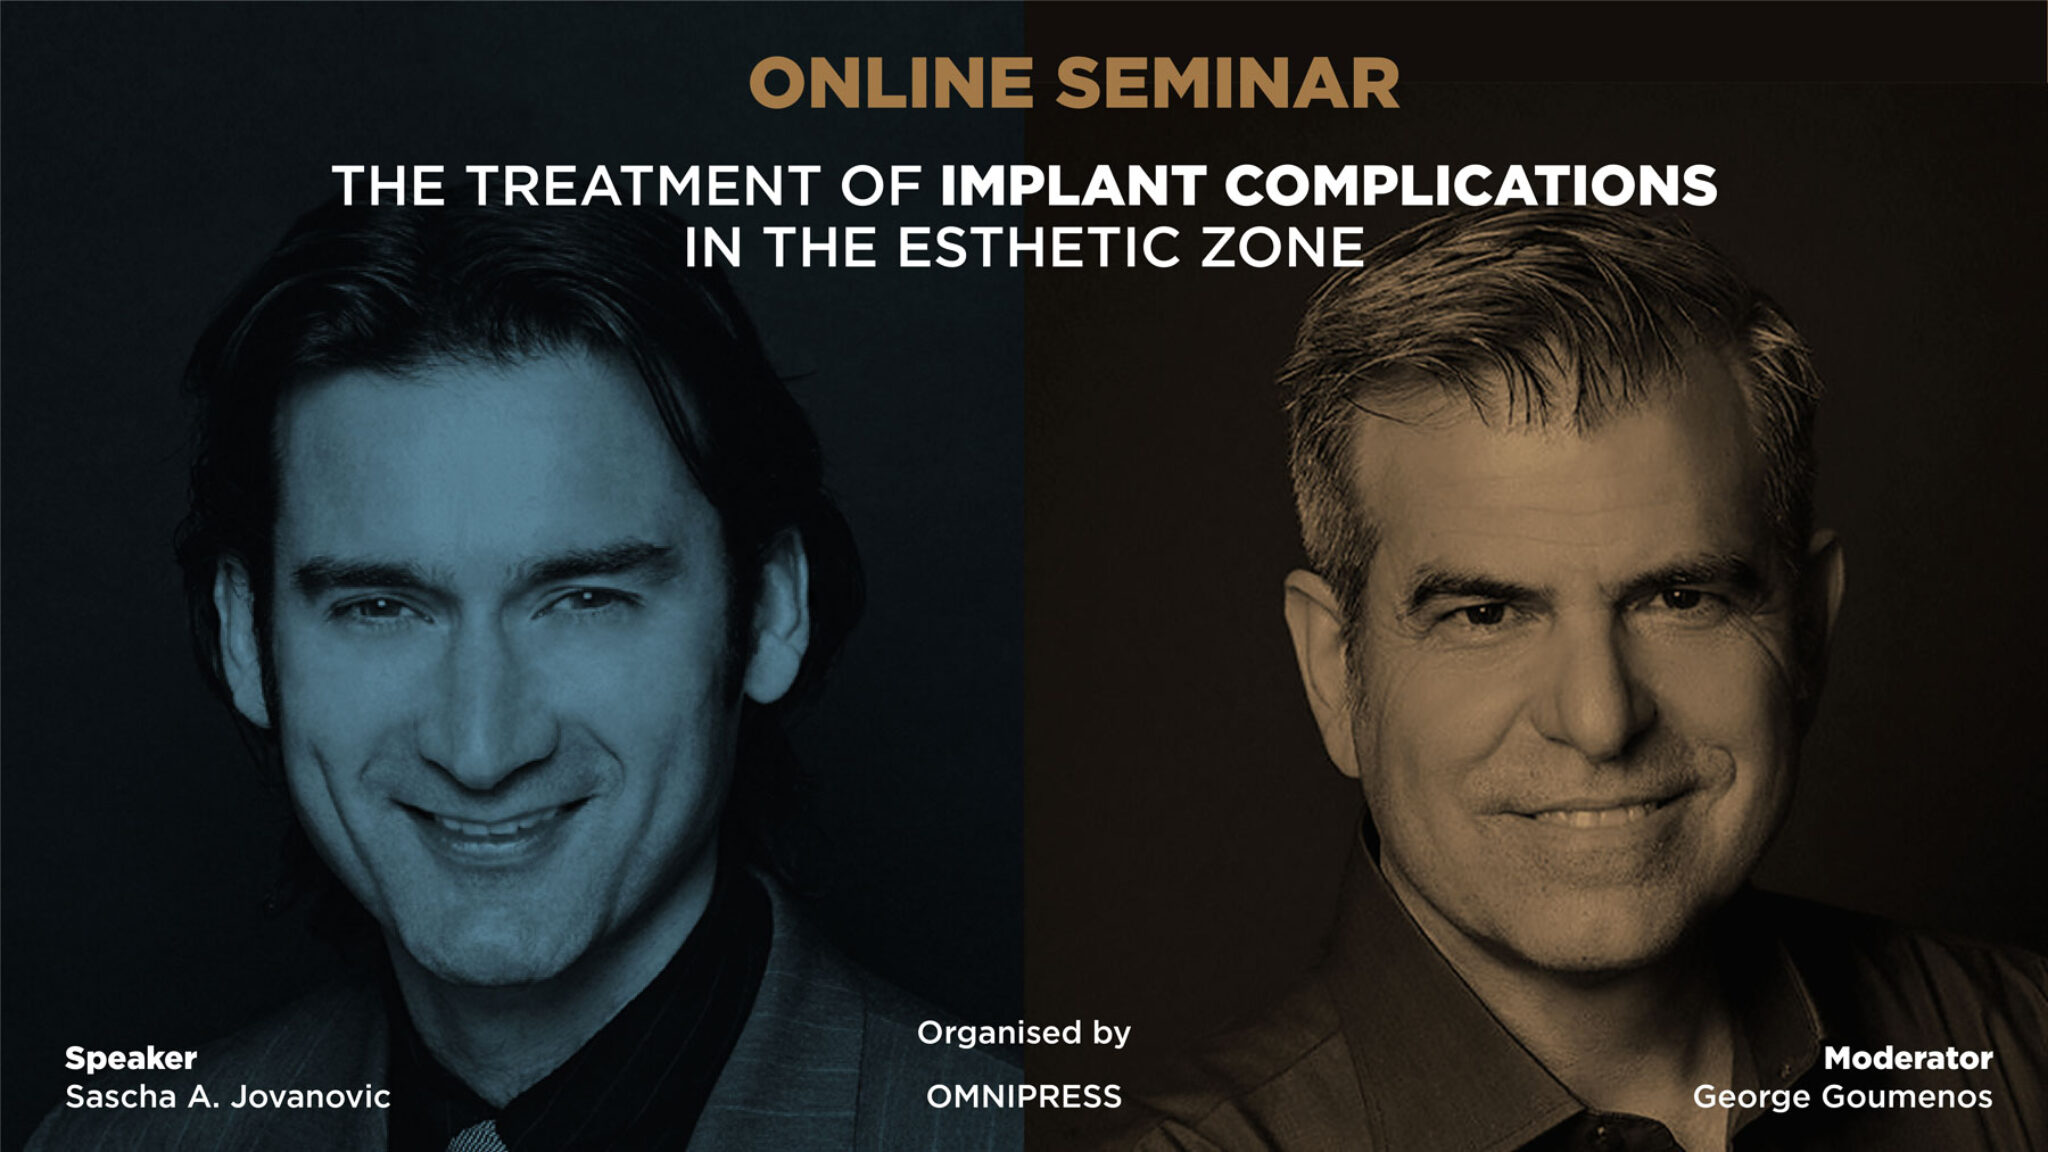 The treatment of implant complications in the esthetic zone